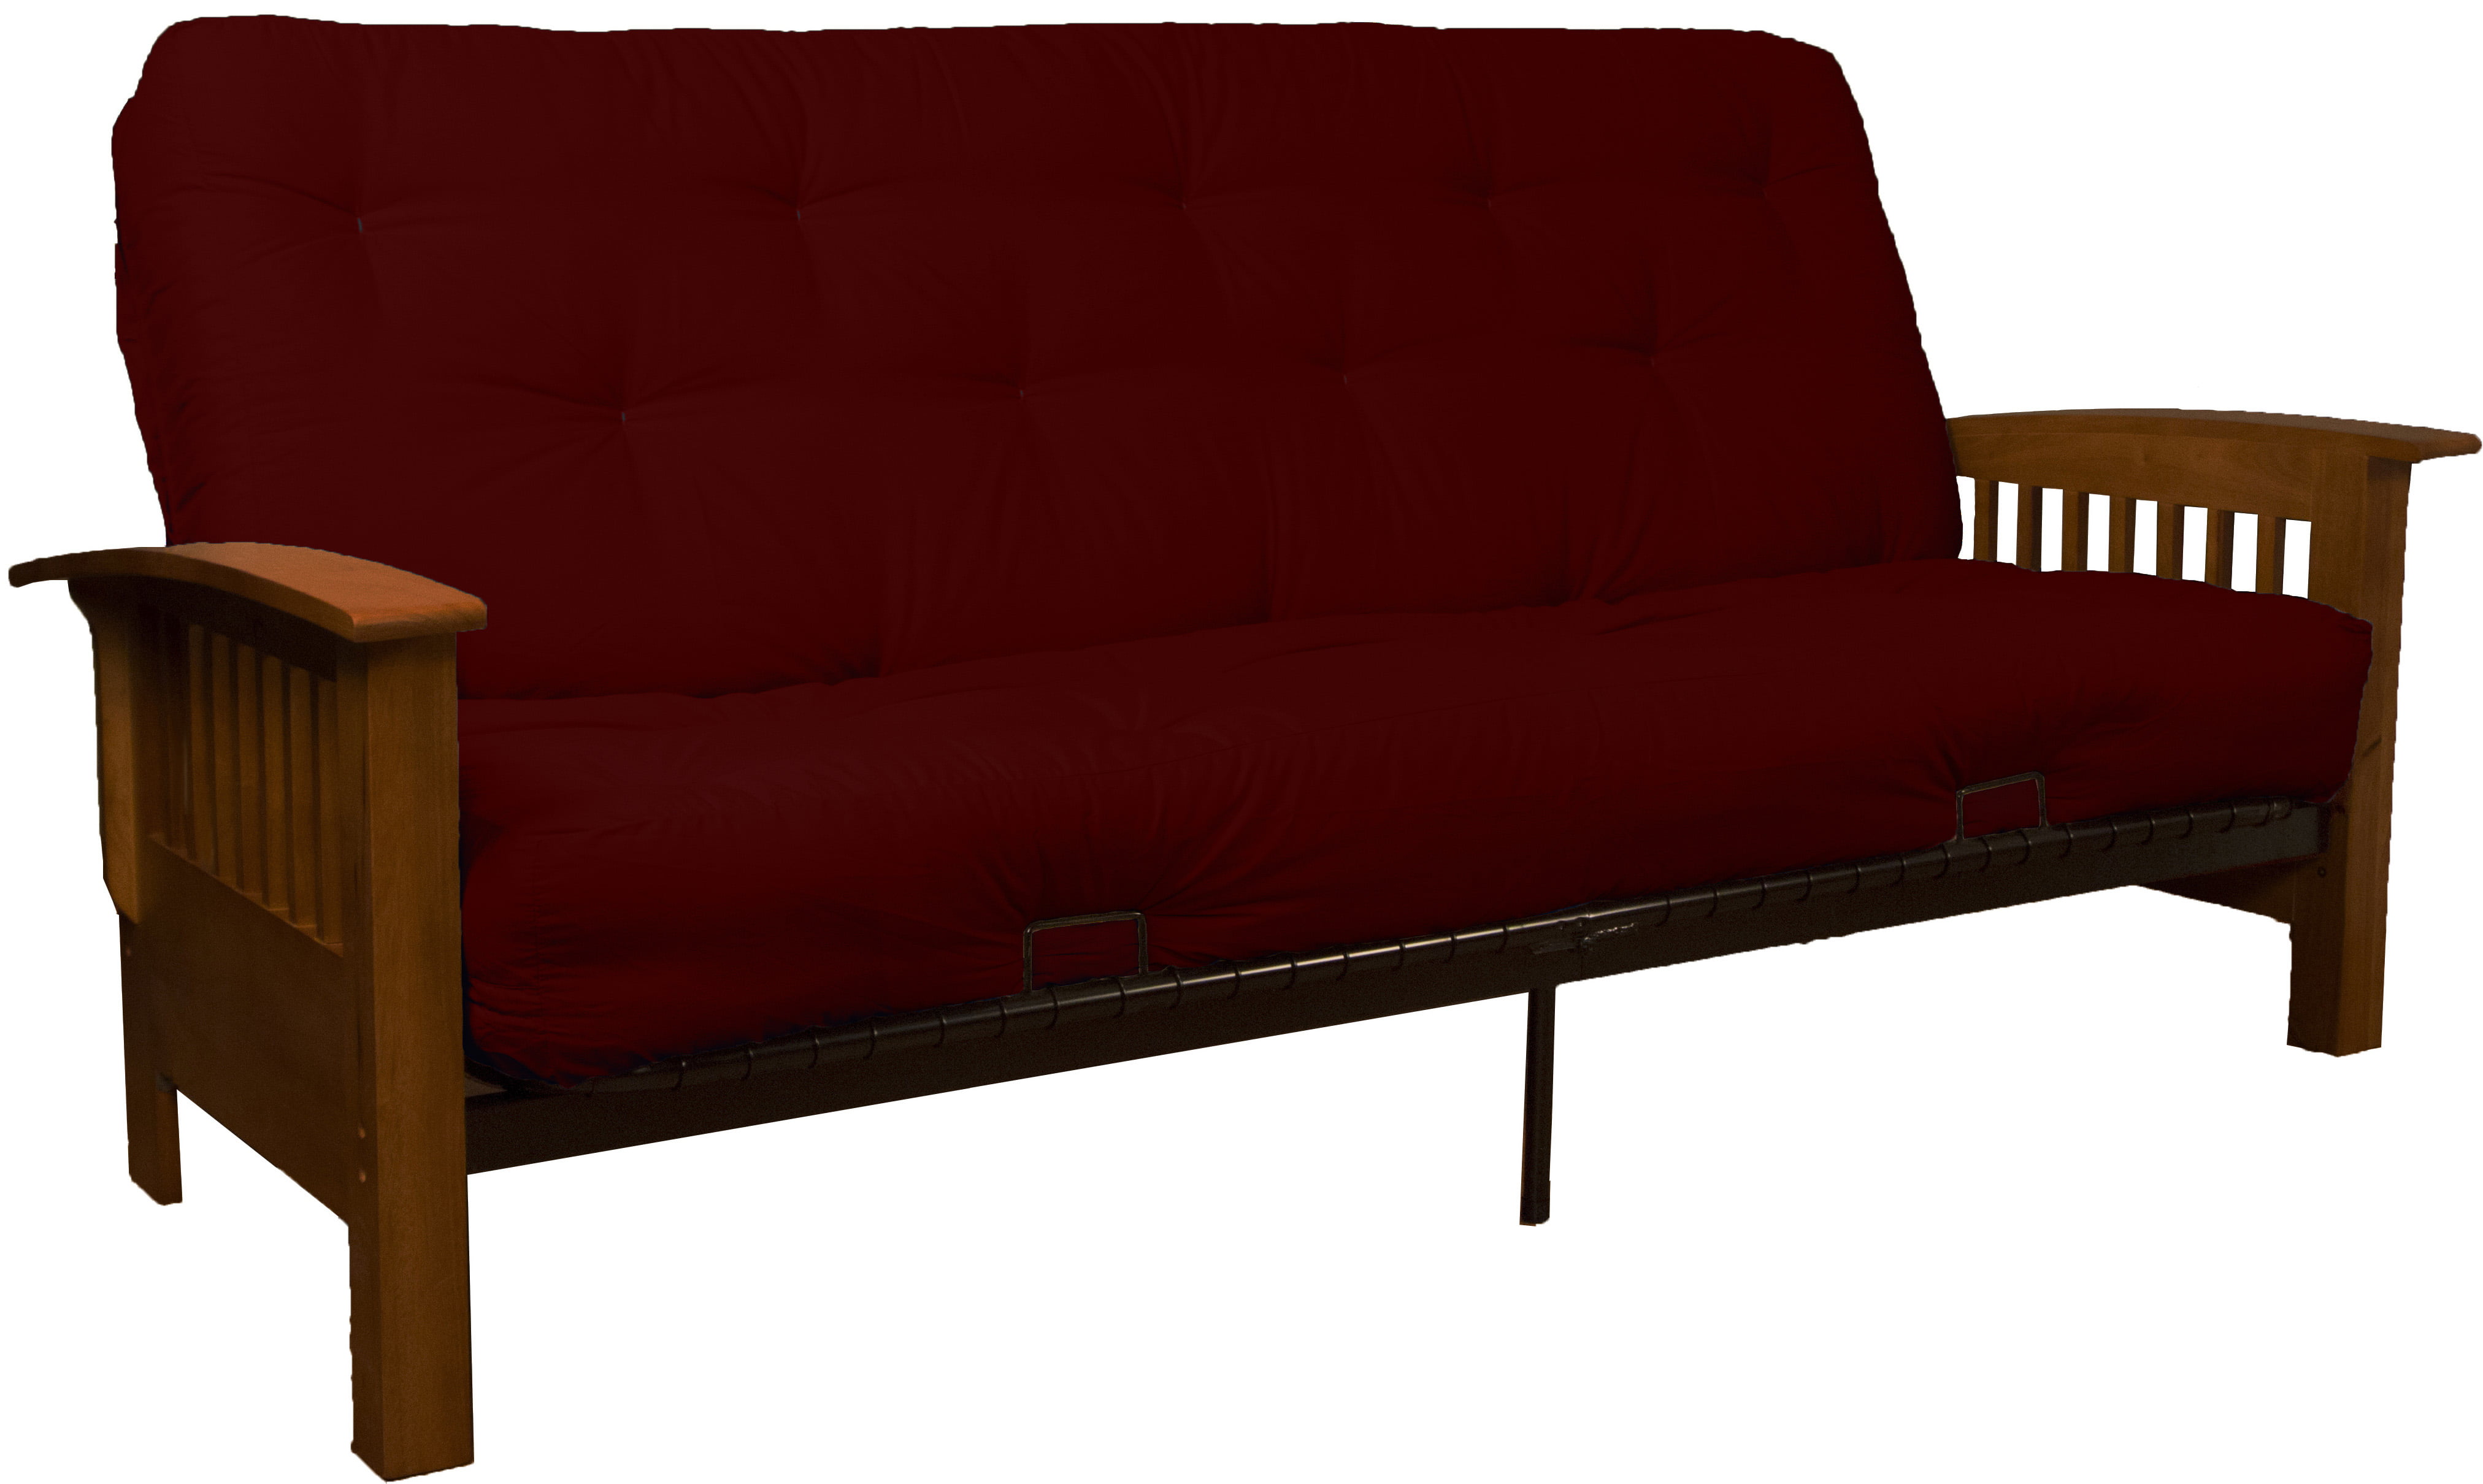 Craftsman Style Futon Sofa Bed Mission Rim Wall Hugger In